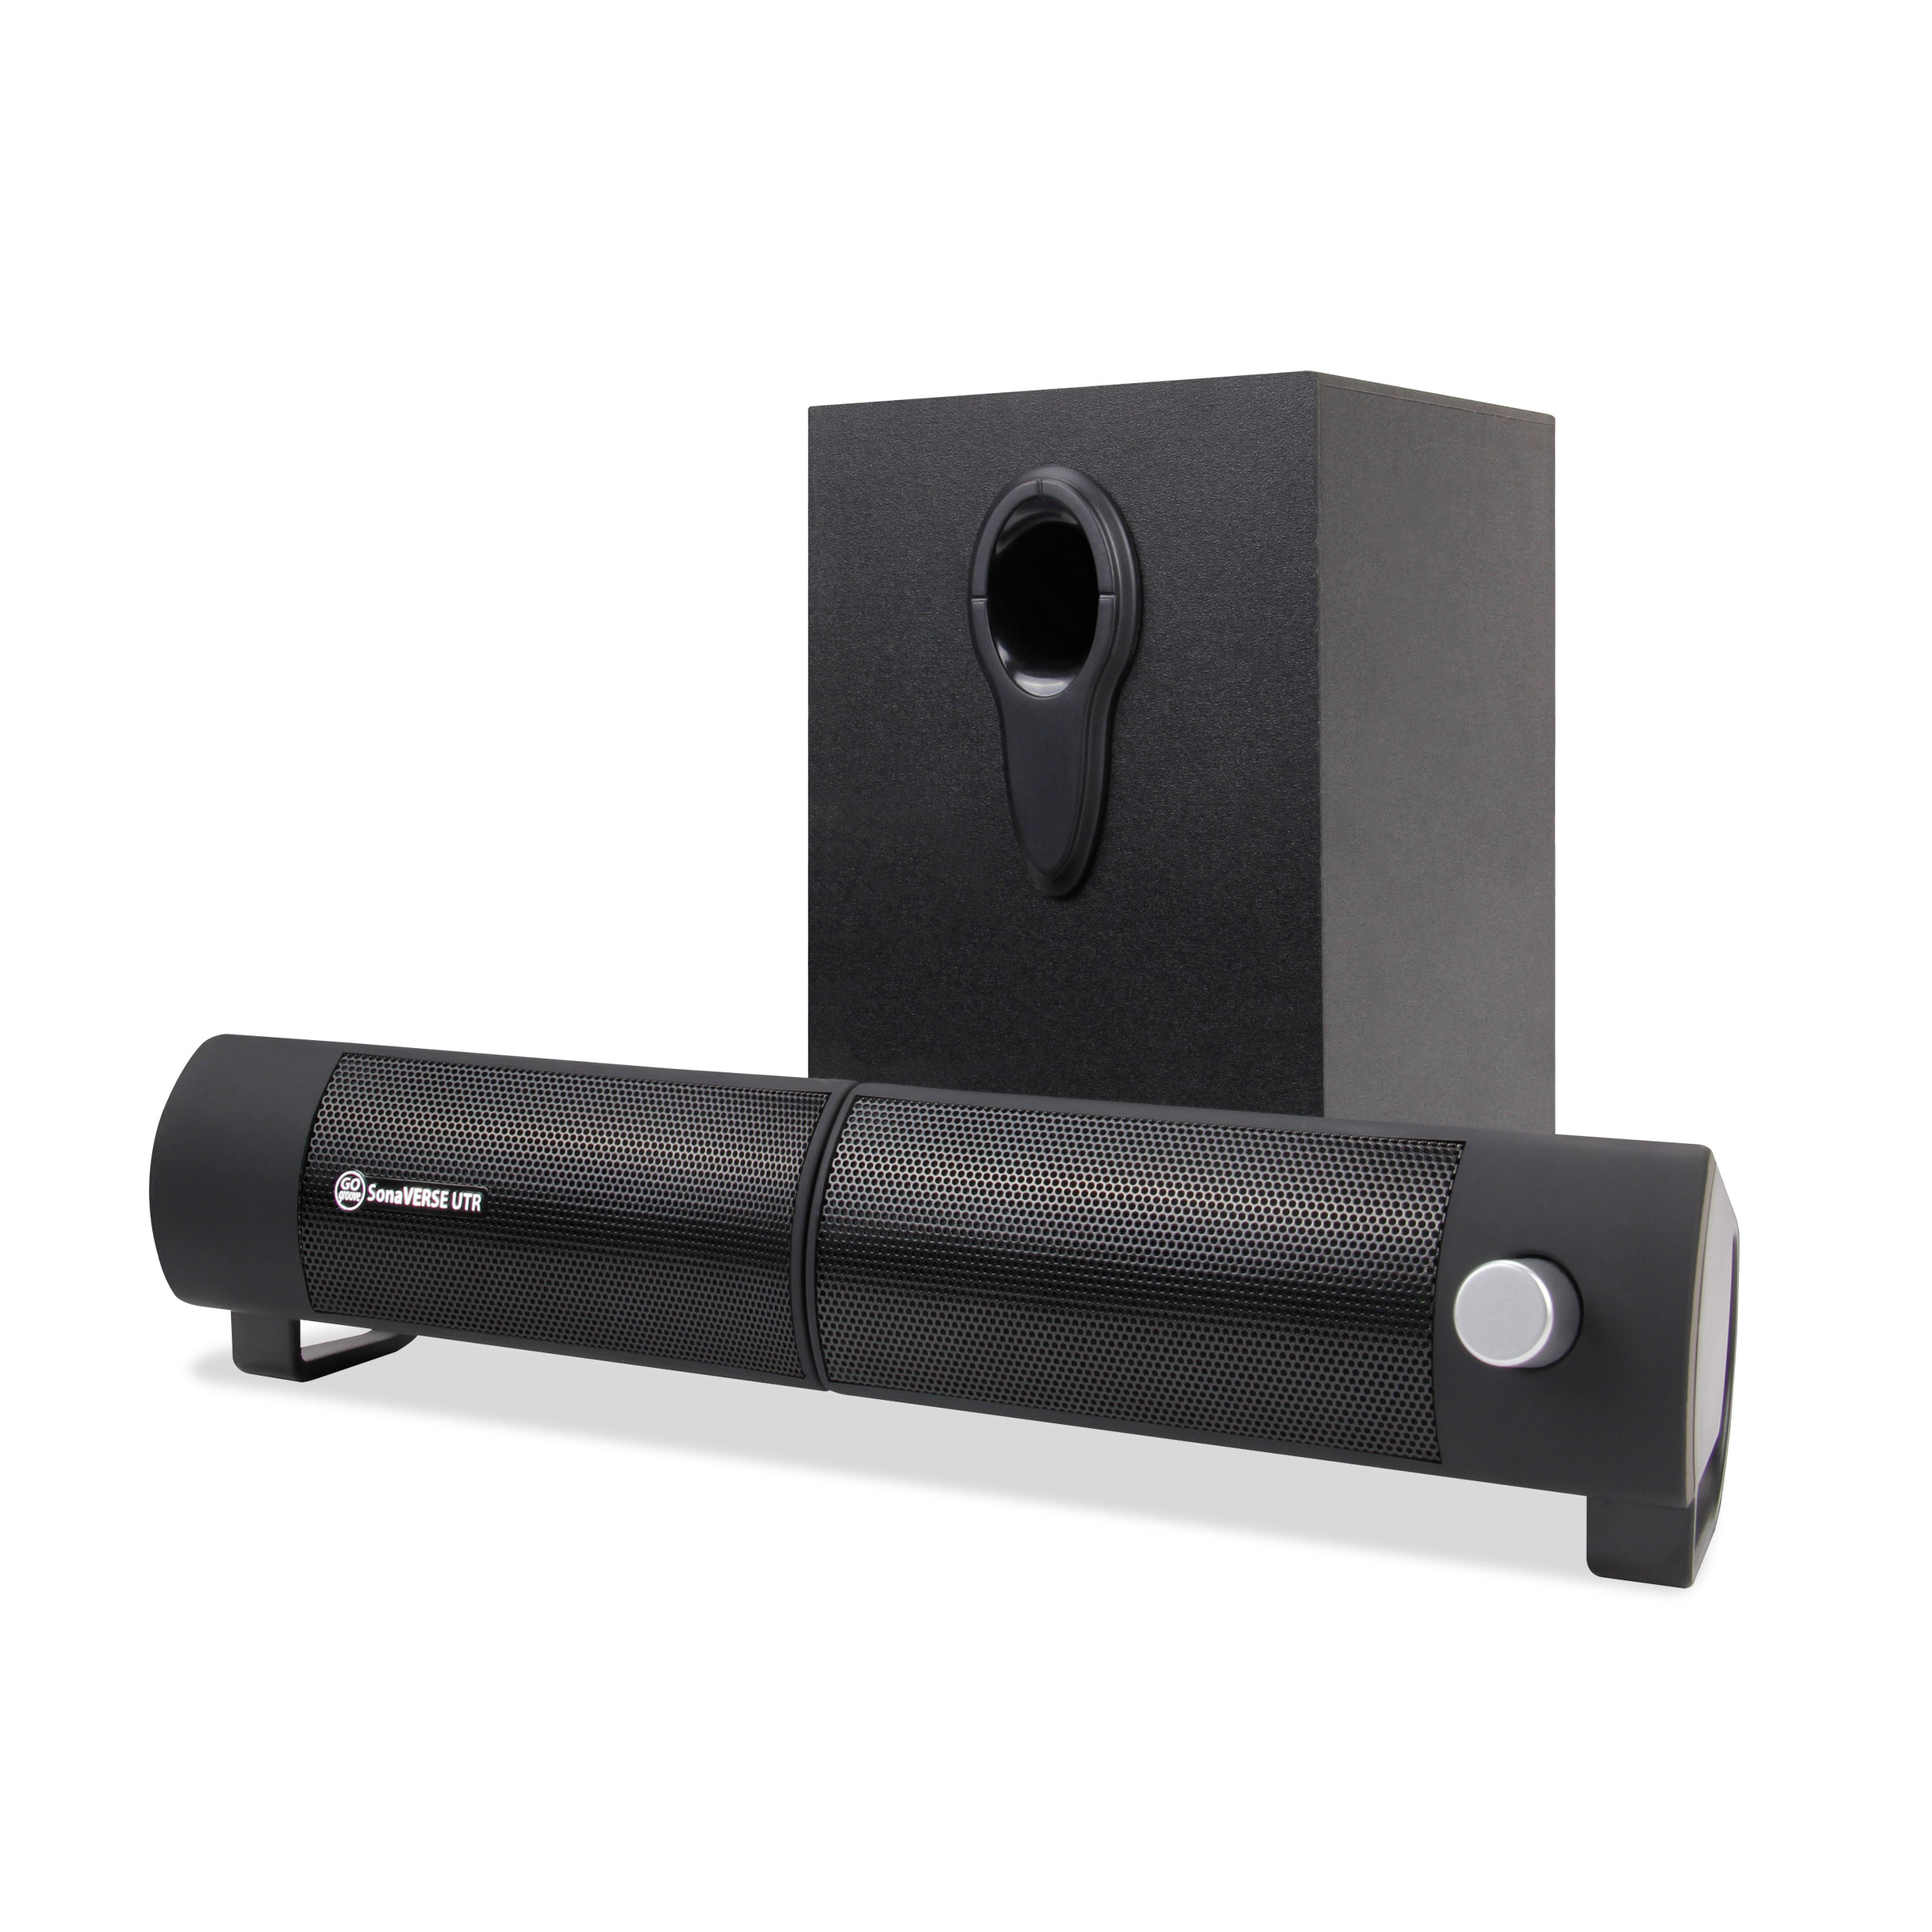 GOgroove SonaVERSE UTR USB Powered 2.1 Computer Speaker Sound Bar and Wired Subwoofer (Blackout) - image 1 of 9